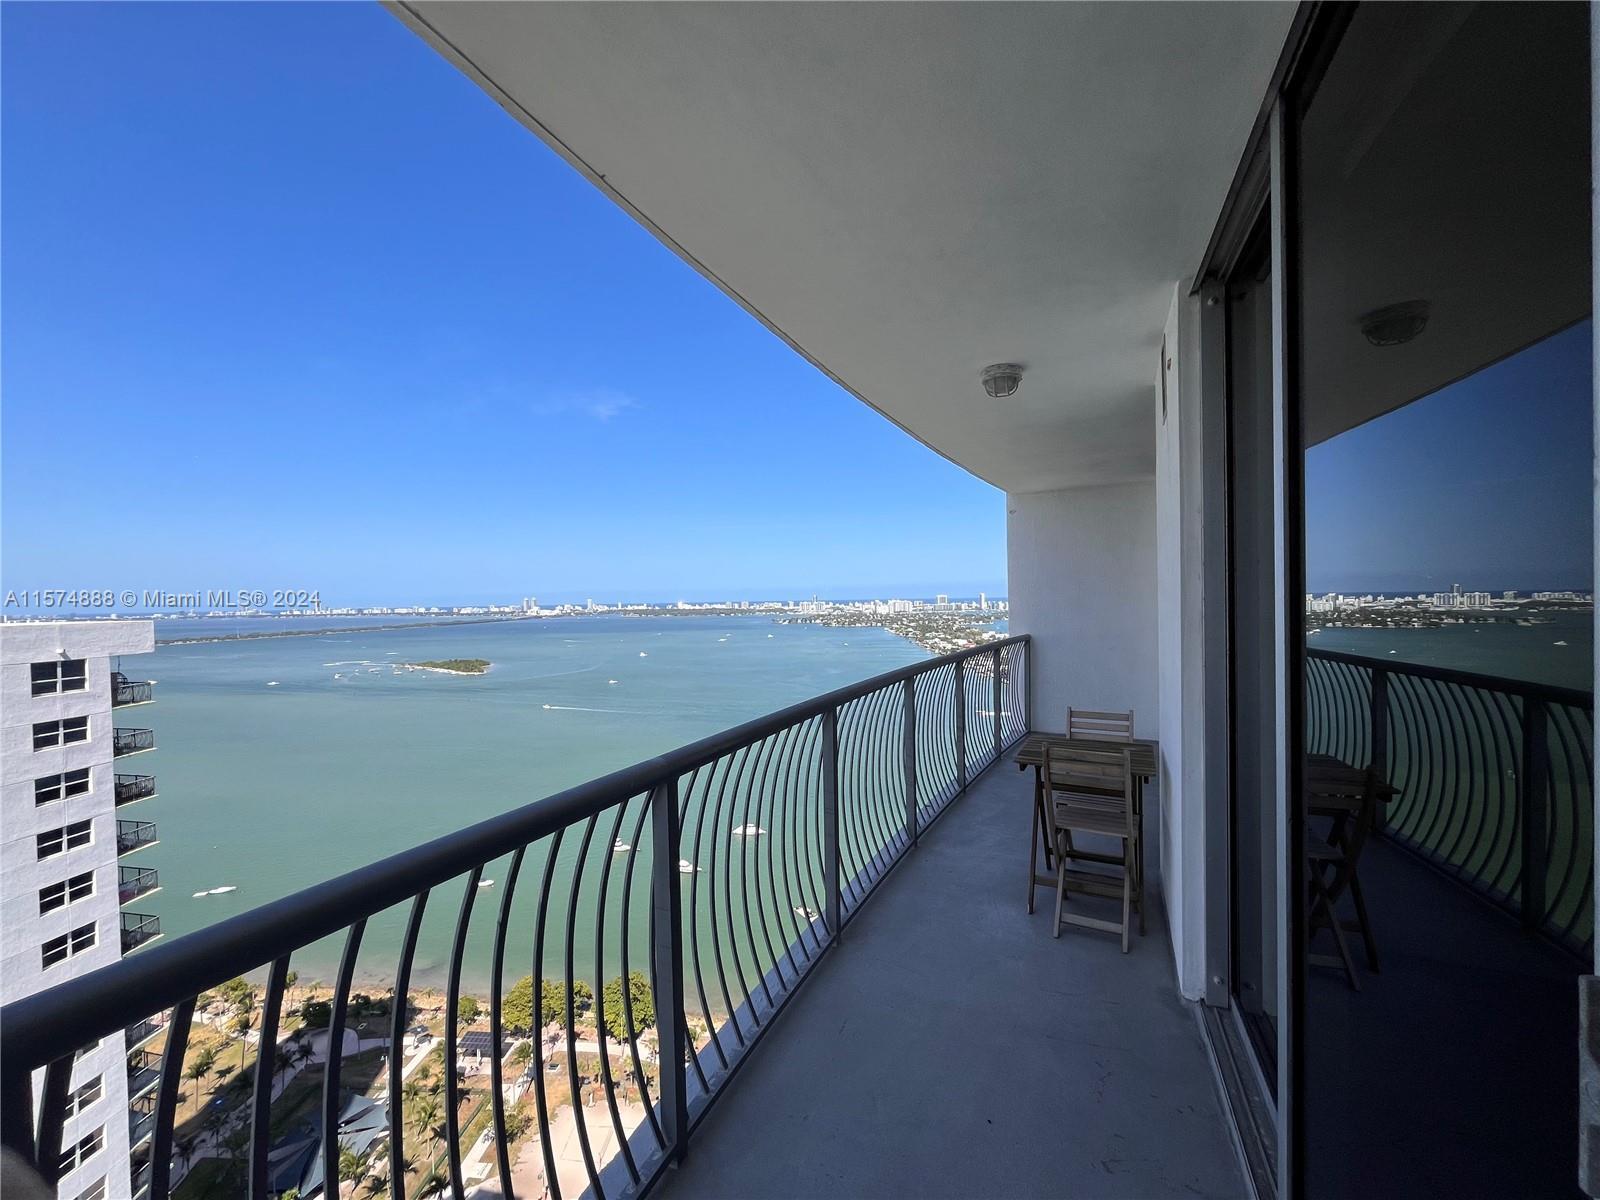 One bedroom one bathroom at Opera Tower overlooking Biscayne Bay views from your balcony. Kitchen is